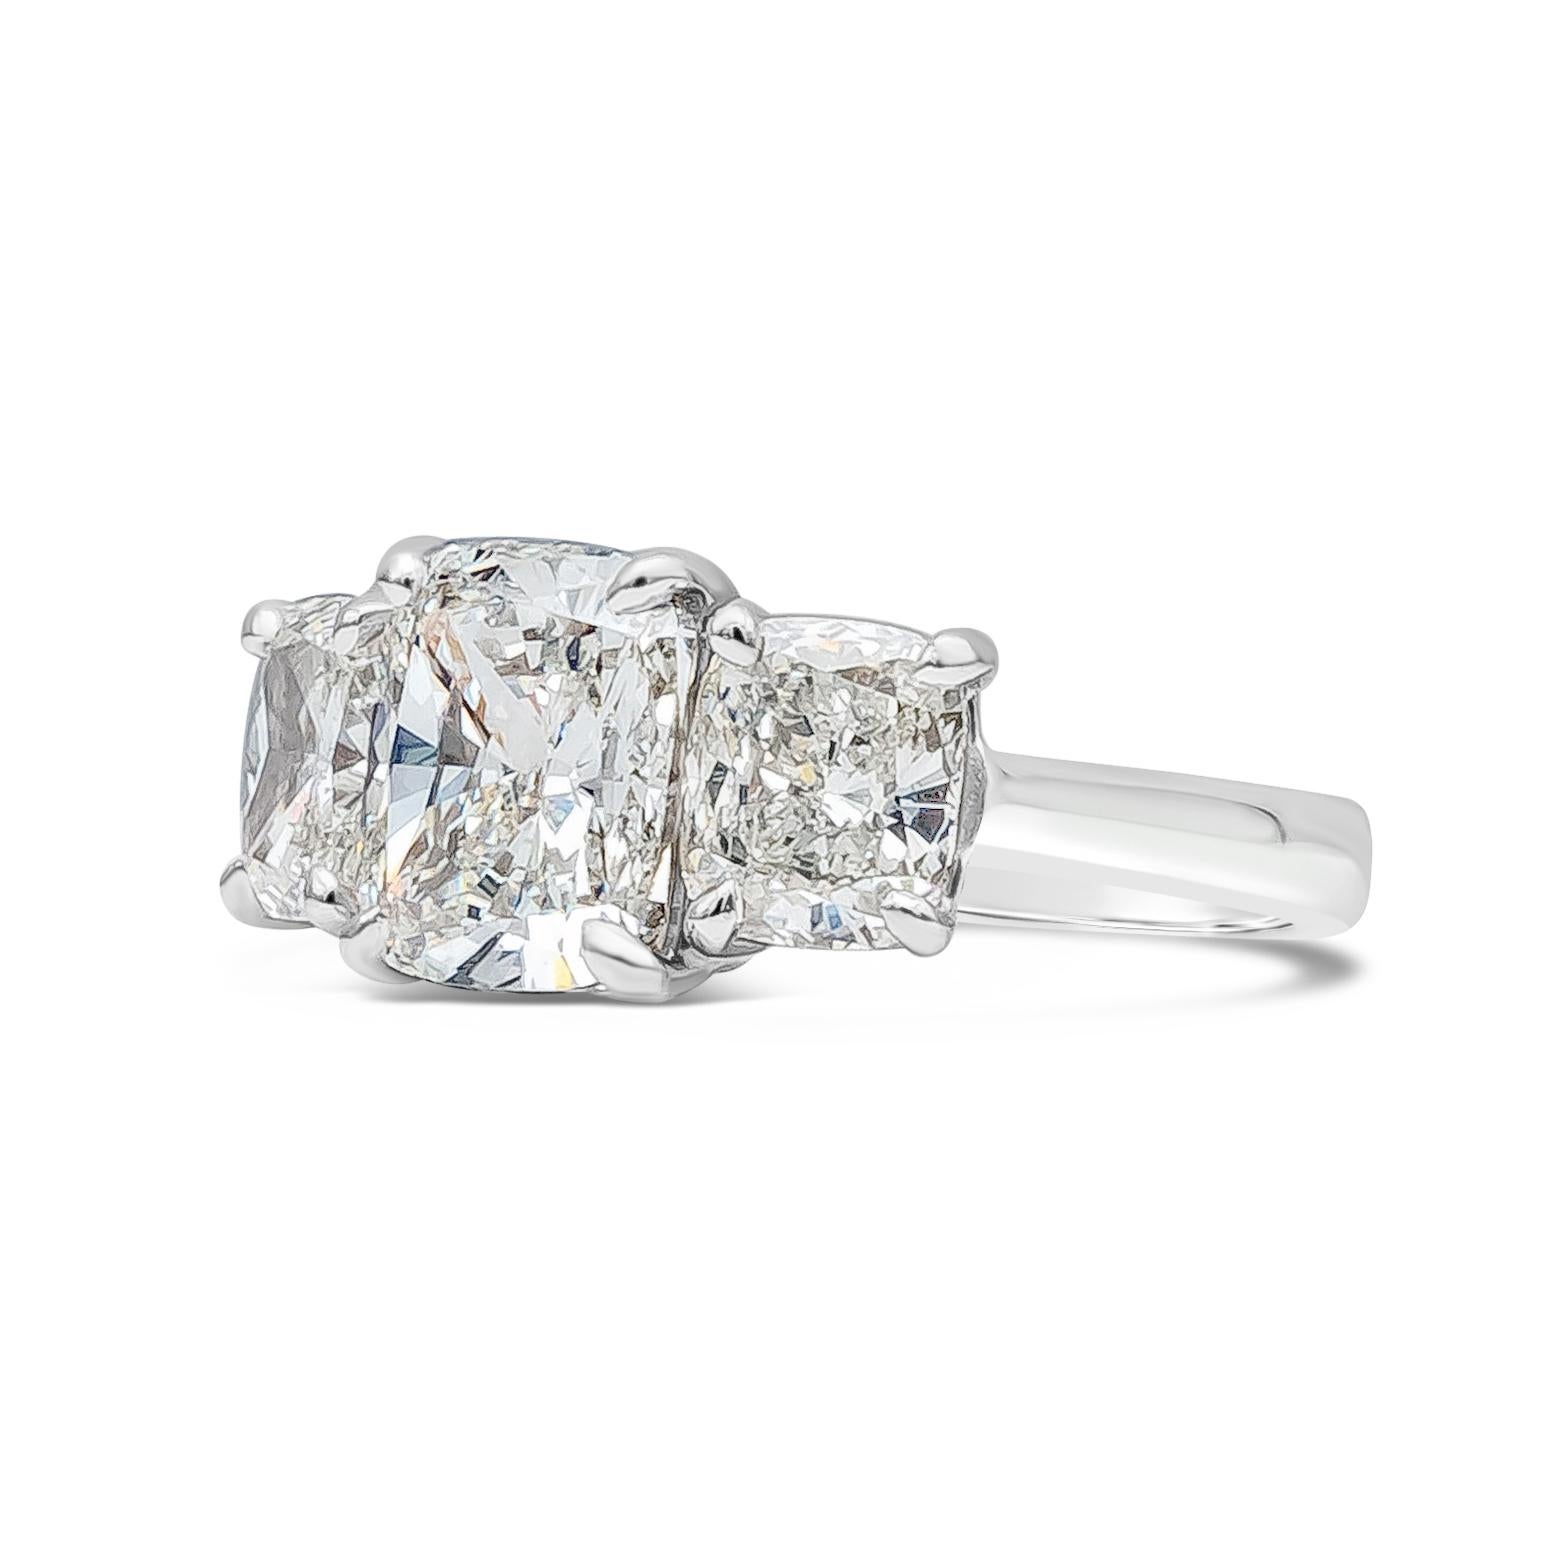 A stunning three stone engagement ring showcasing a GIA Certified Cushion Cut center stone weighing 5.02 carats total, H Color and VS1 in Clarity. Accompanied by GIA Certified cushion cut diamond on each side weighing 3.45 carats total, H Color and